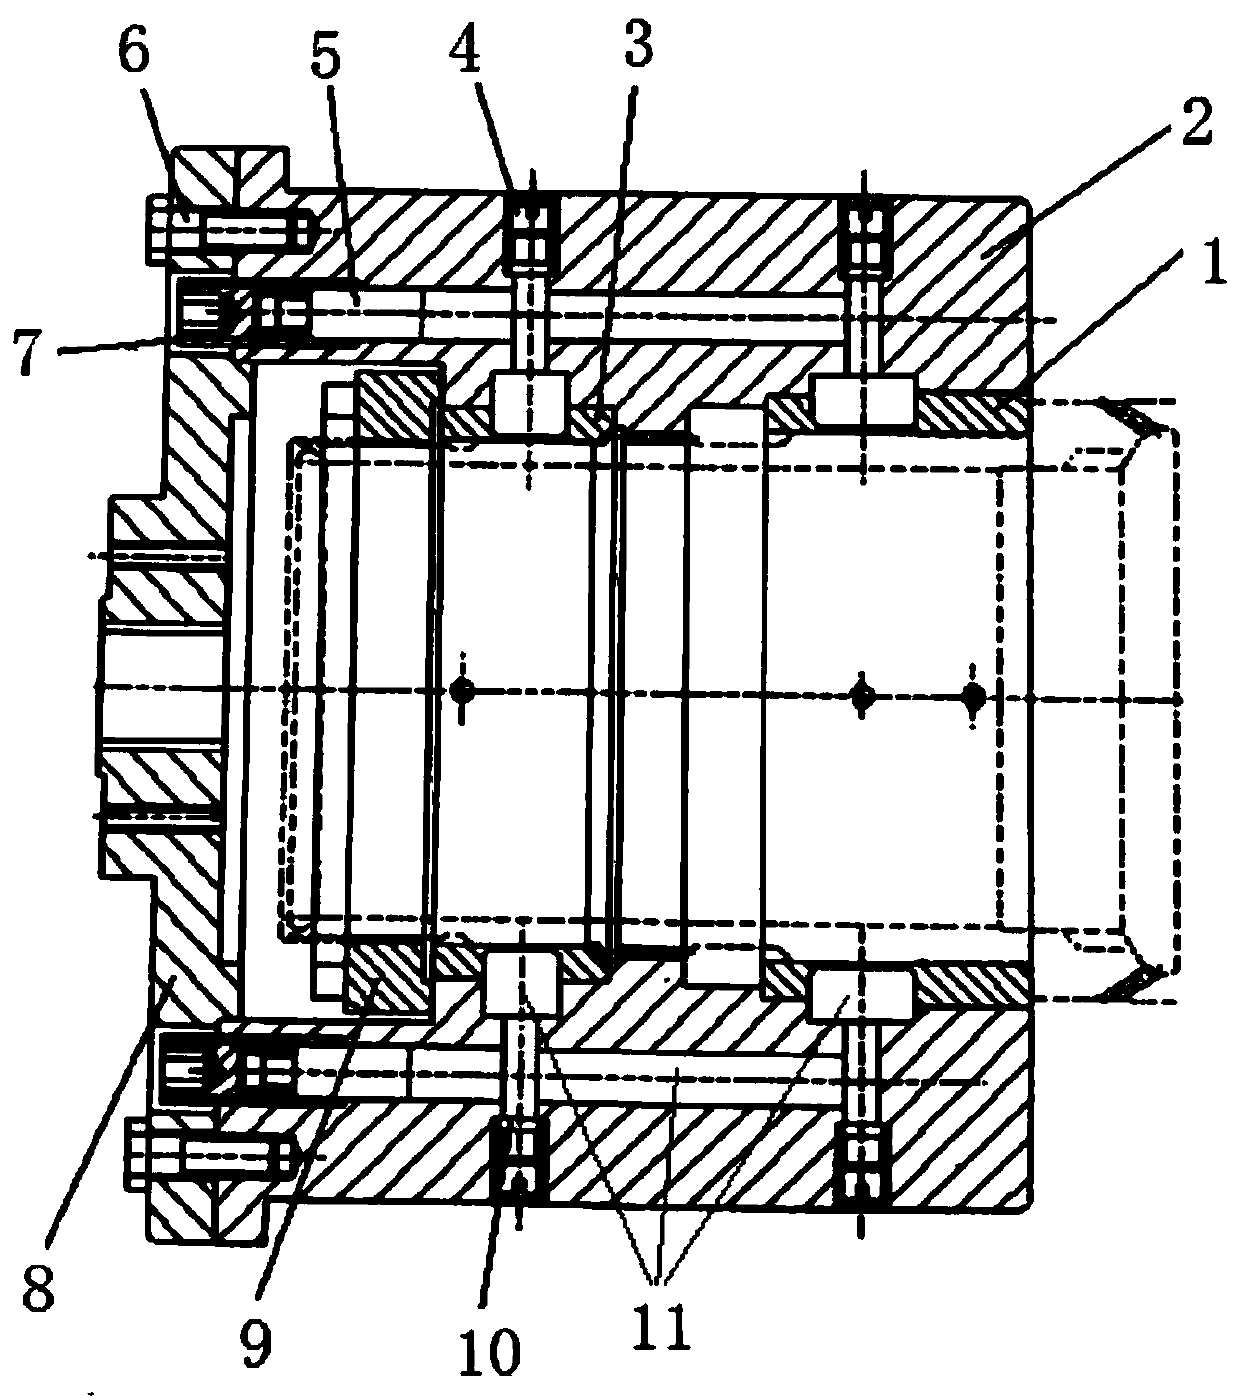 A double-cylindrical pressurized rotor balancing fixture